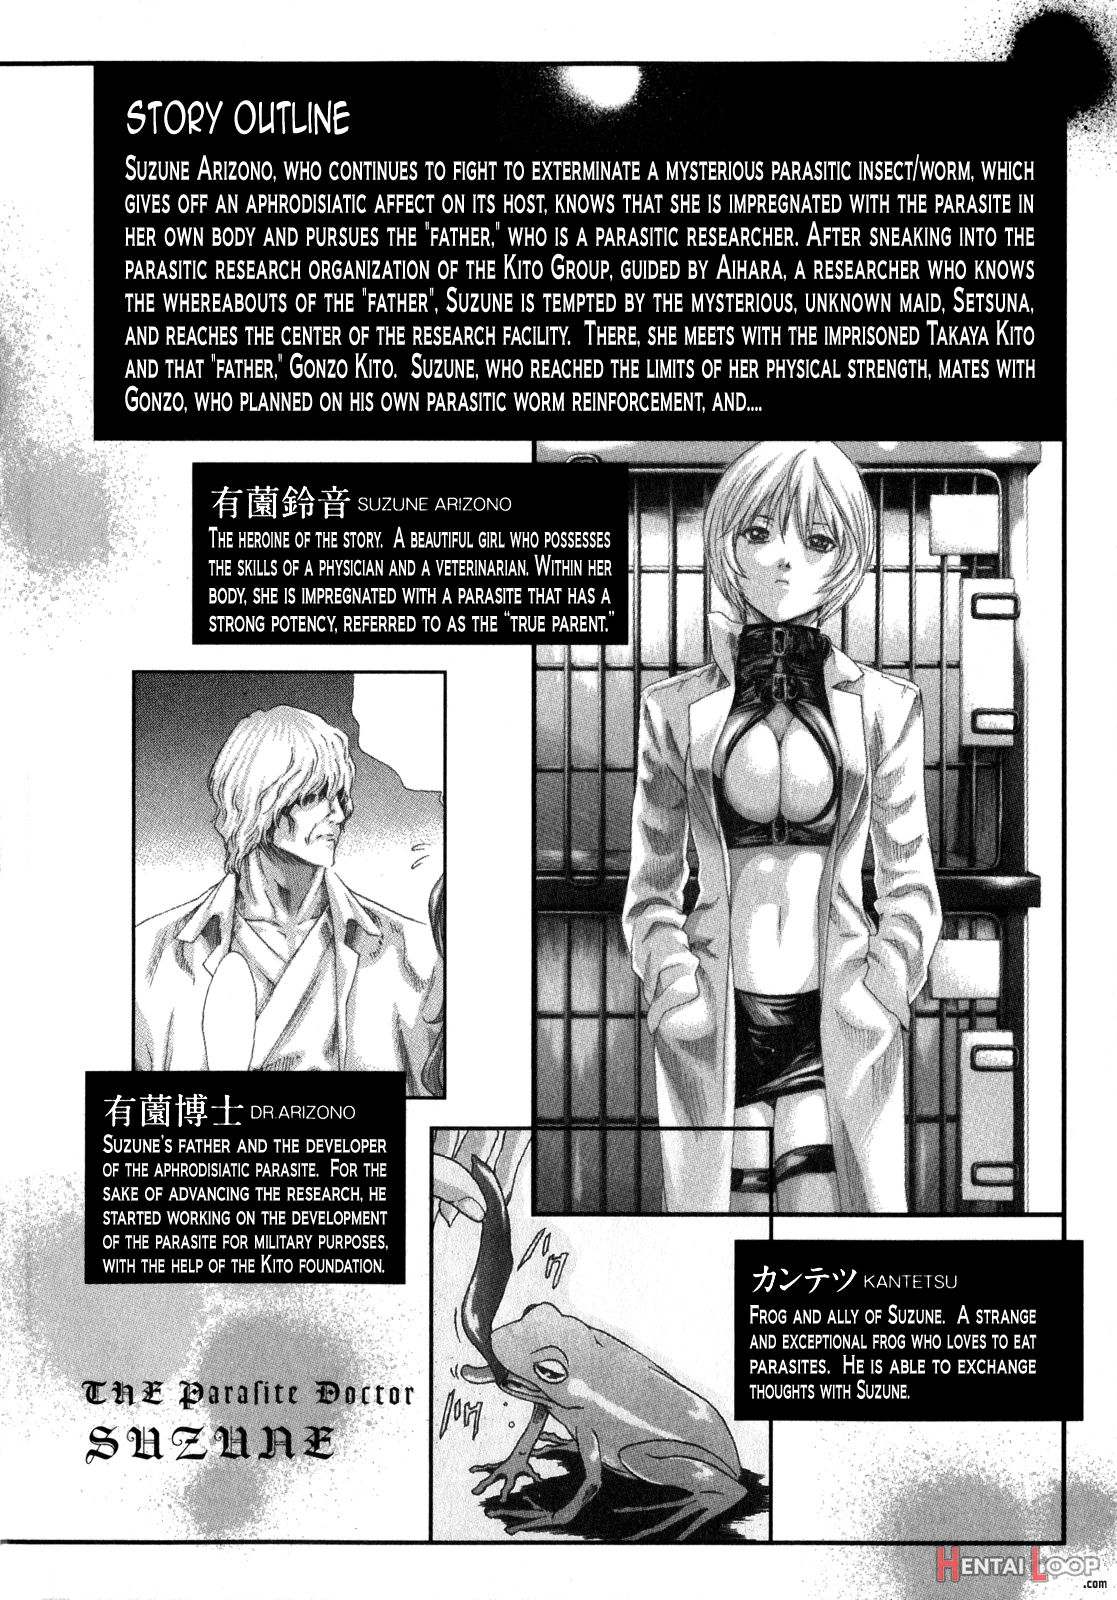 Parasite Doctor Suzune 5 page 5